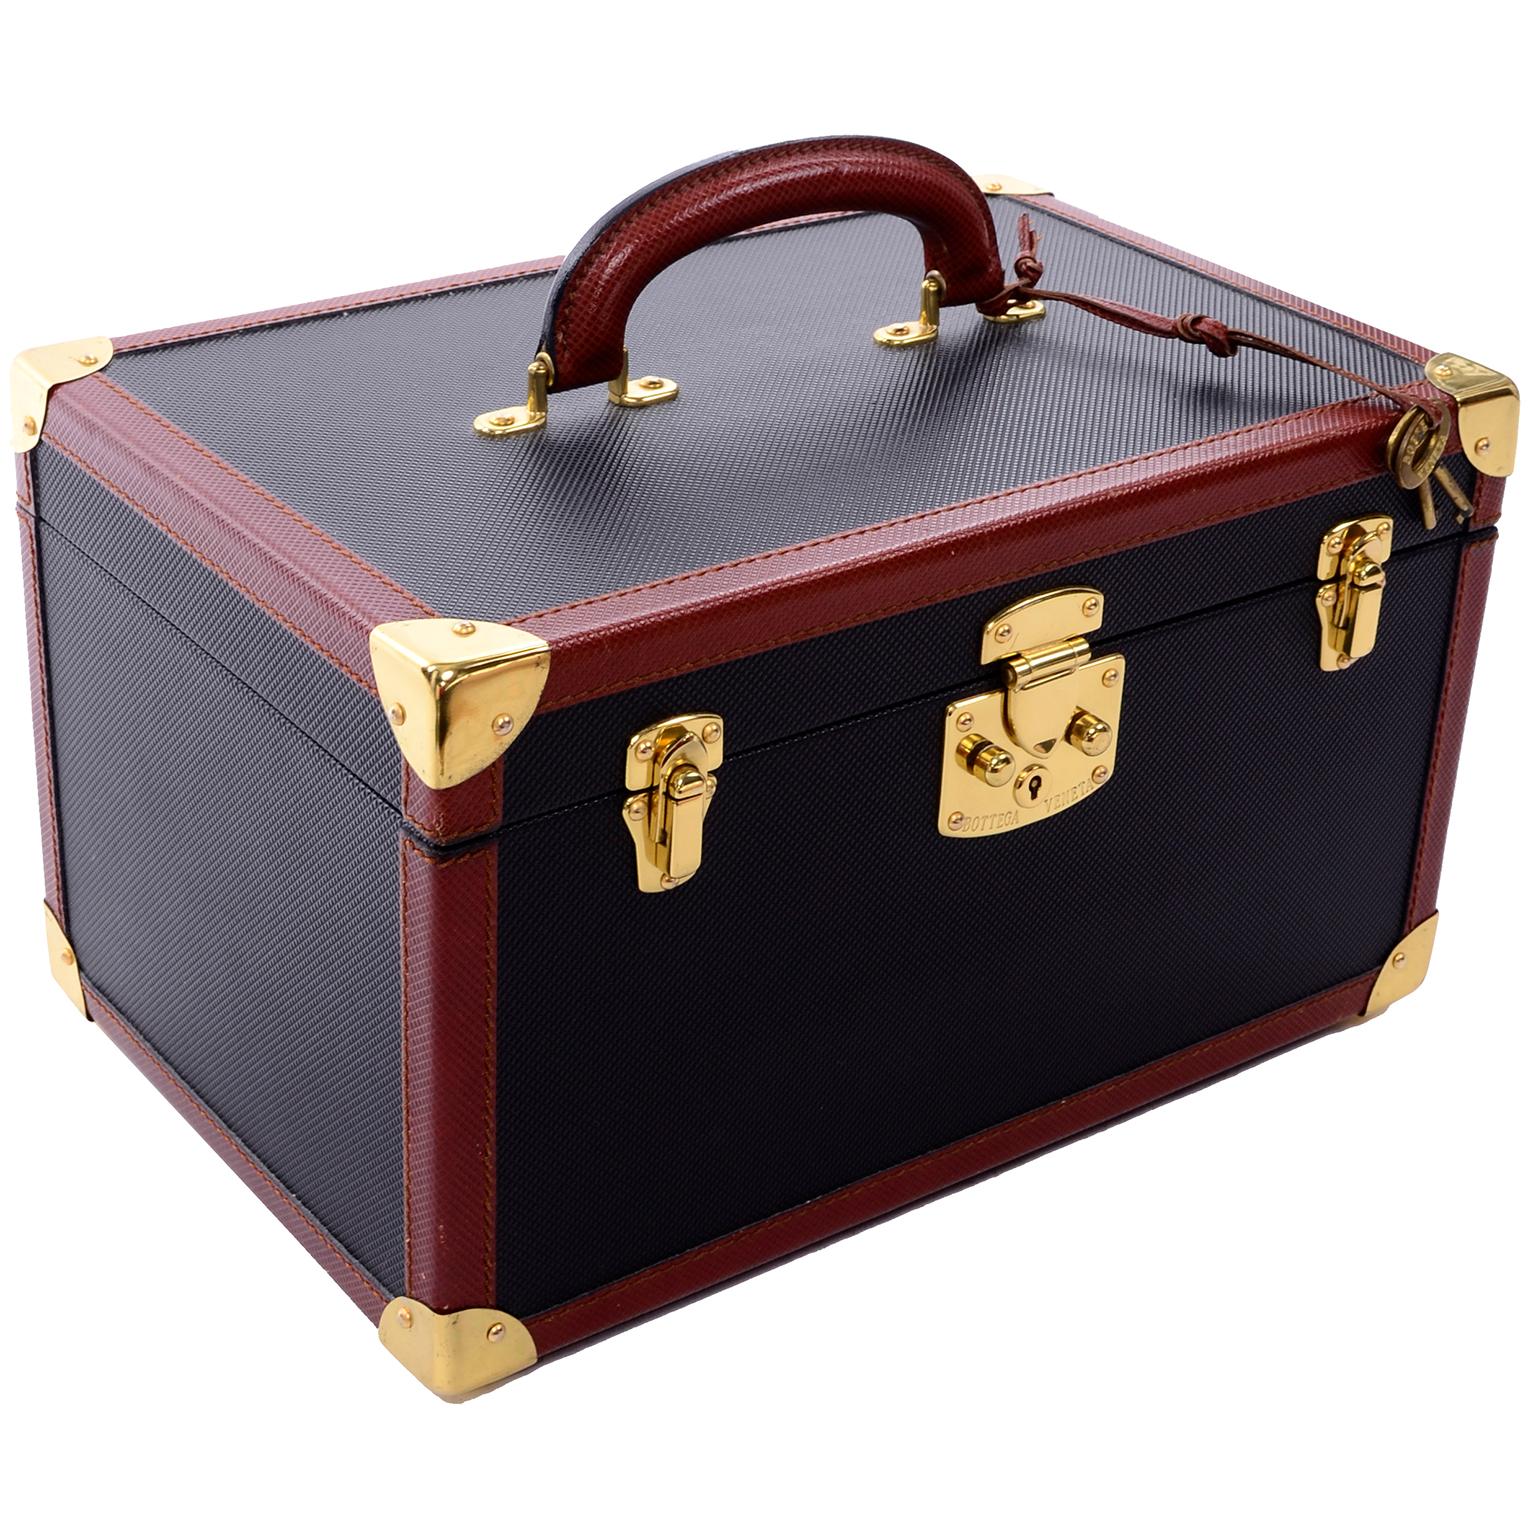 This is a wonderful, timeless Bottega Veneta vintage Train case that comes with its original dust bag and two keys. The inside of the case has a loose box with a roll back top and quilted bottom. Inside is lined with clear plastic for protection and